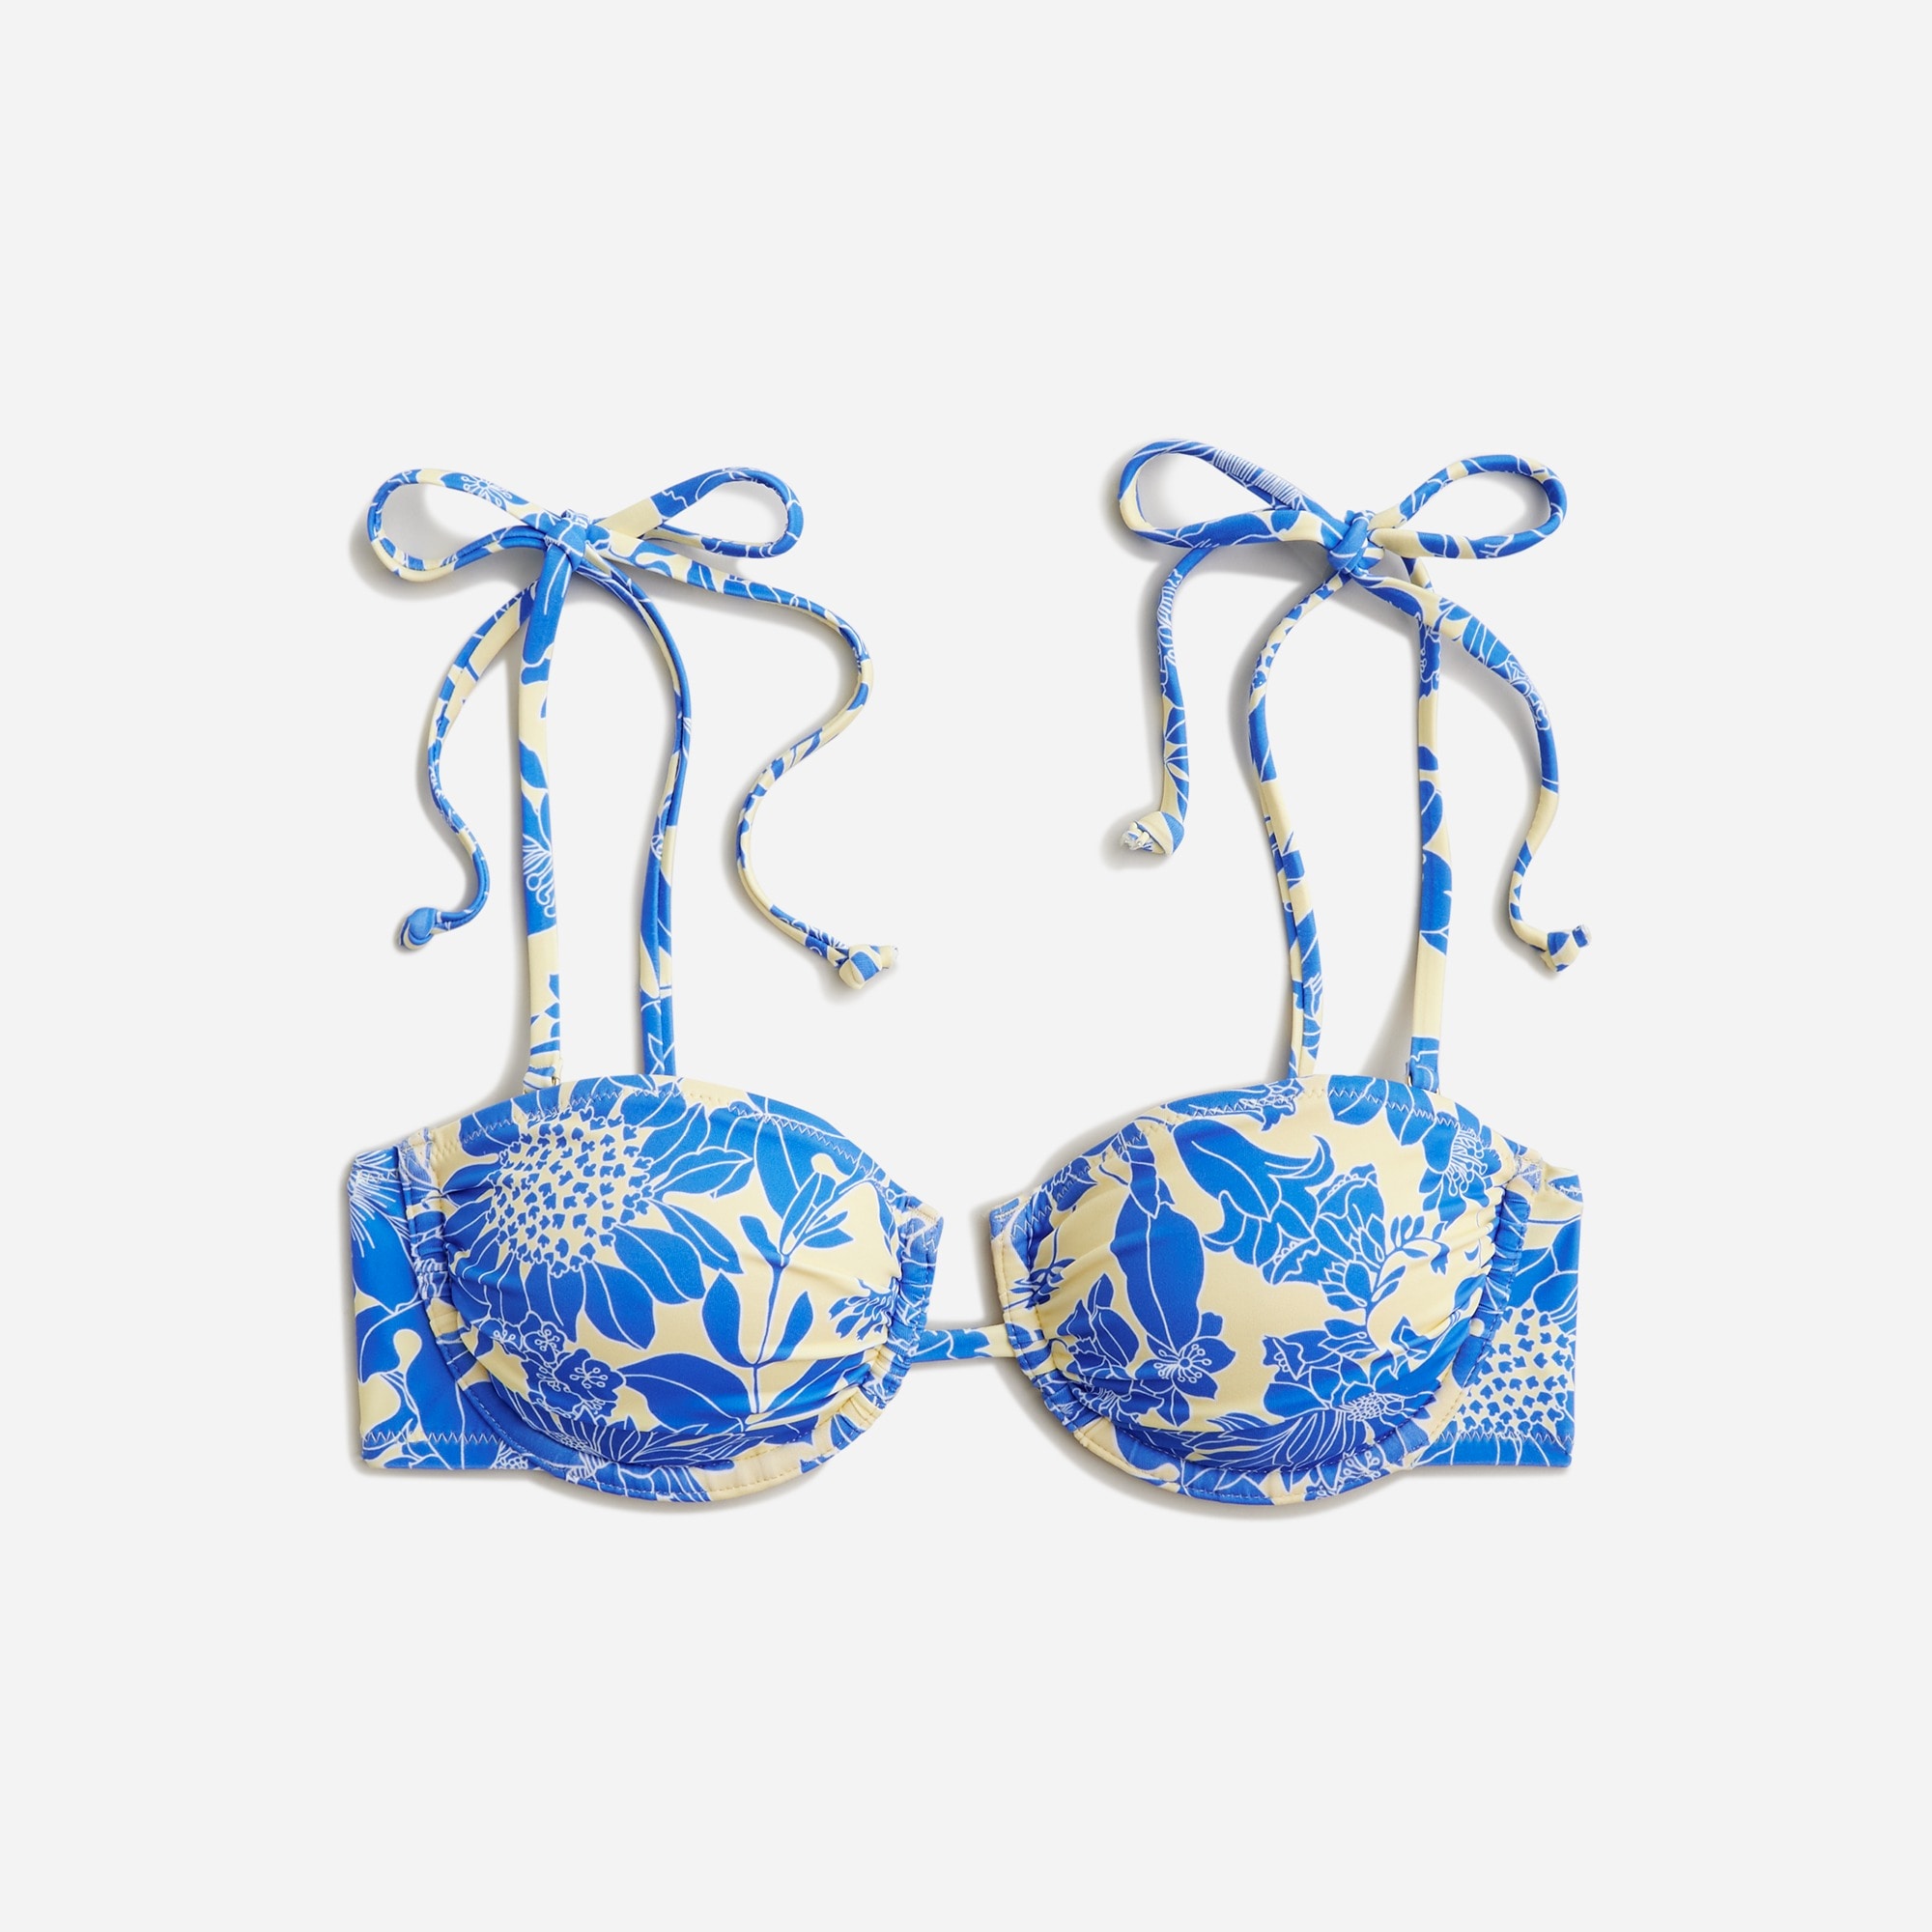  Underwire bikini top with ties in blue floral